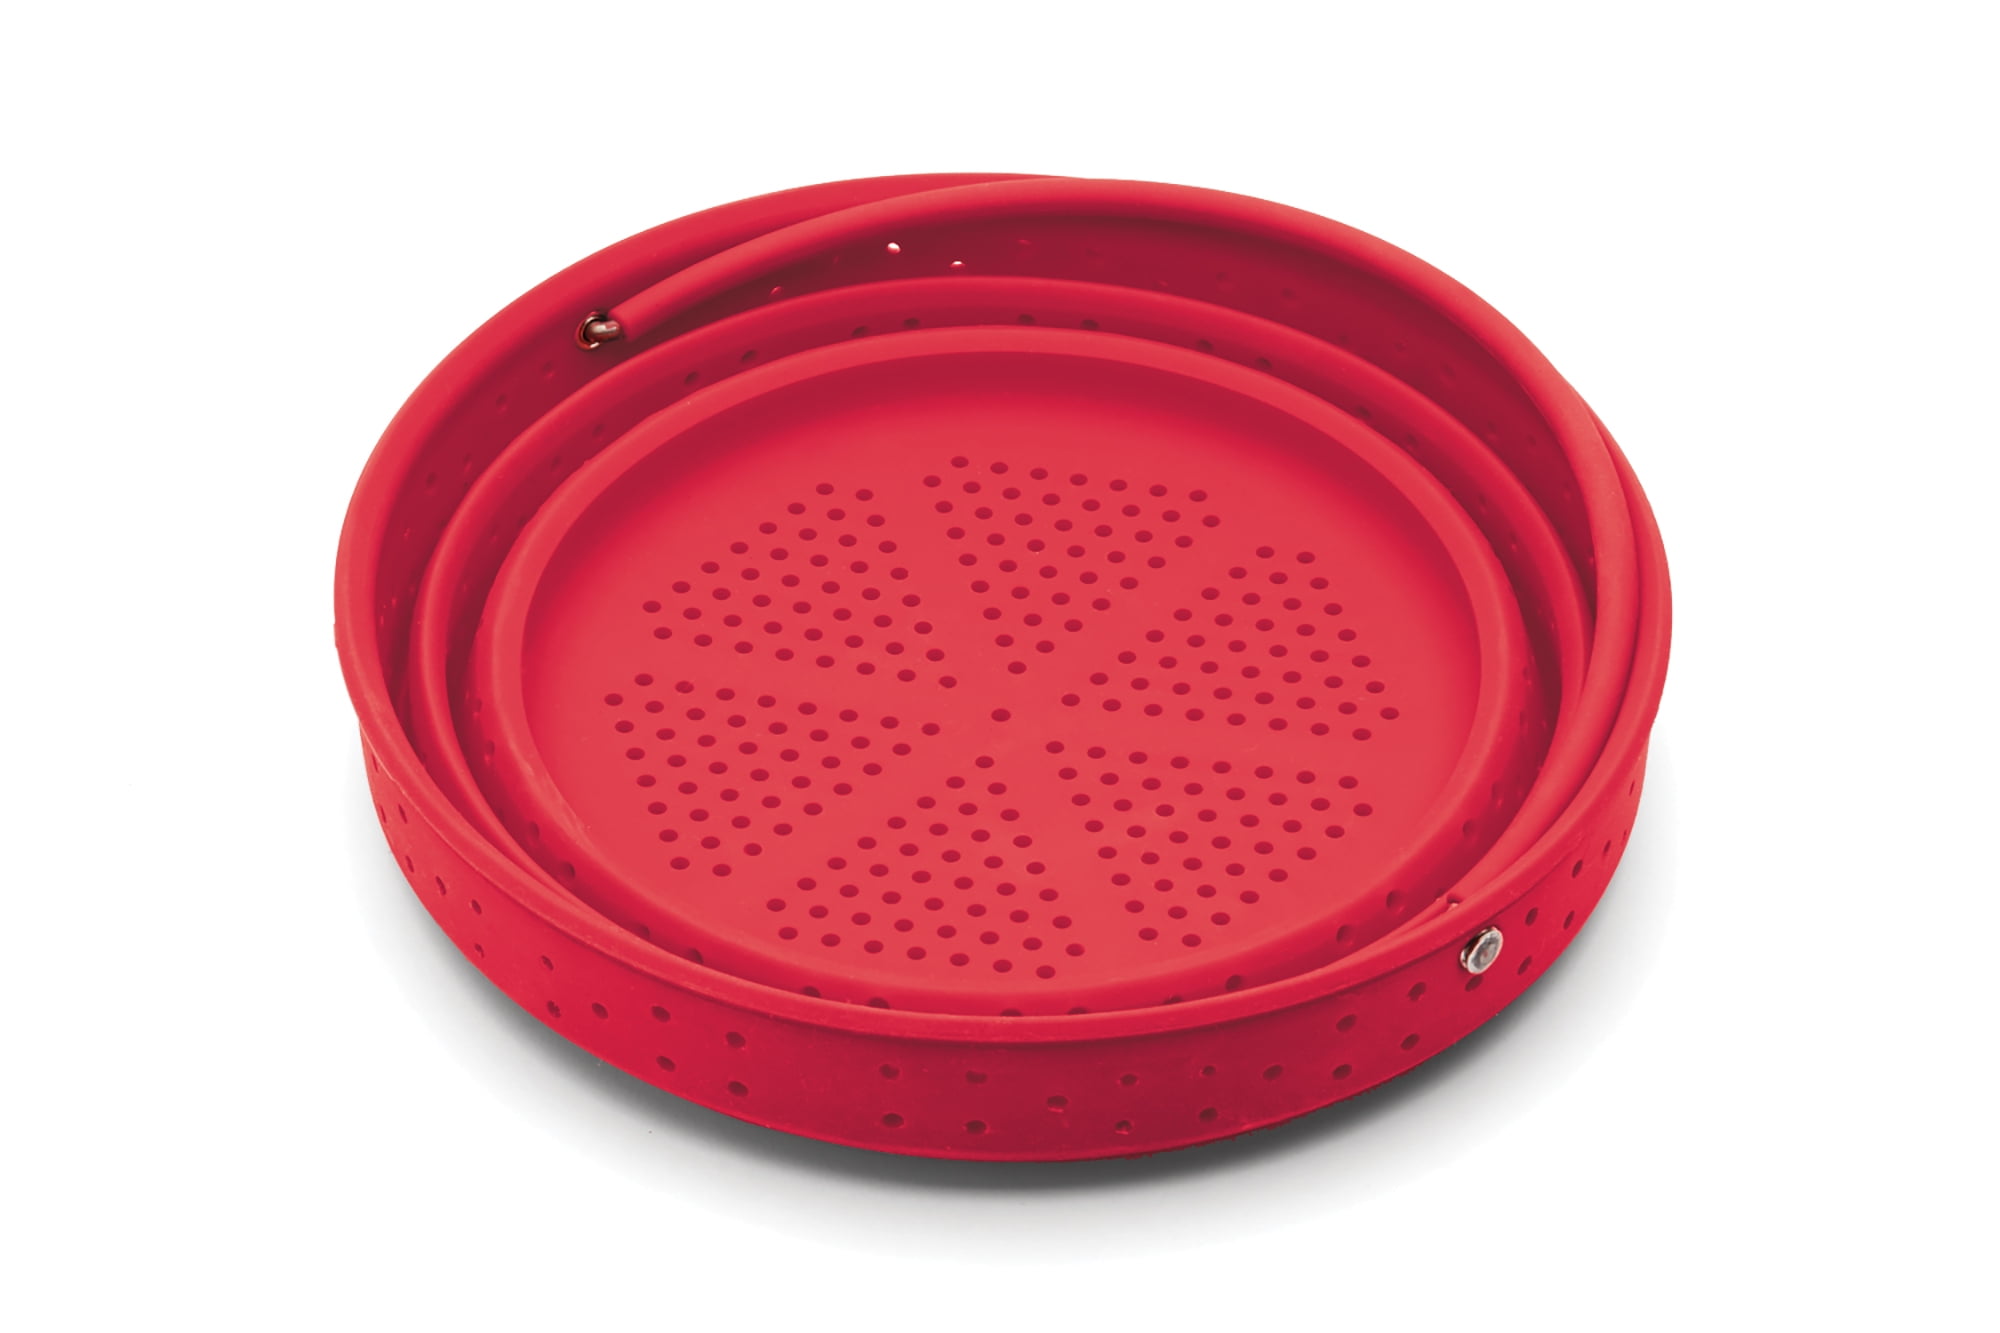 Fox Run 6 qt. Red Collapsible Silicone Steamer Insert for Instant Pot